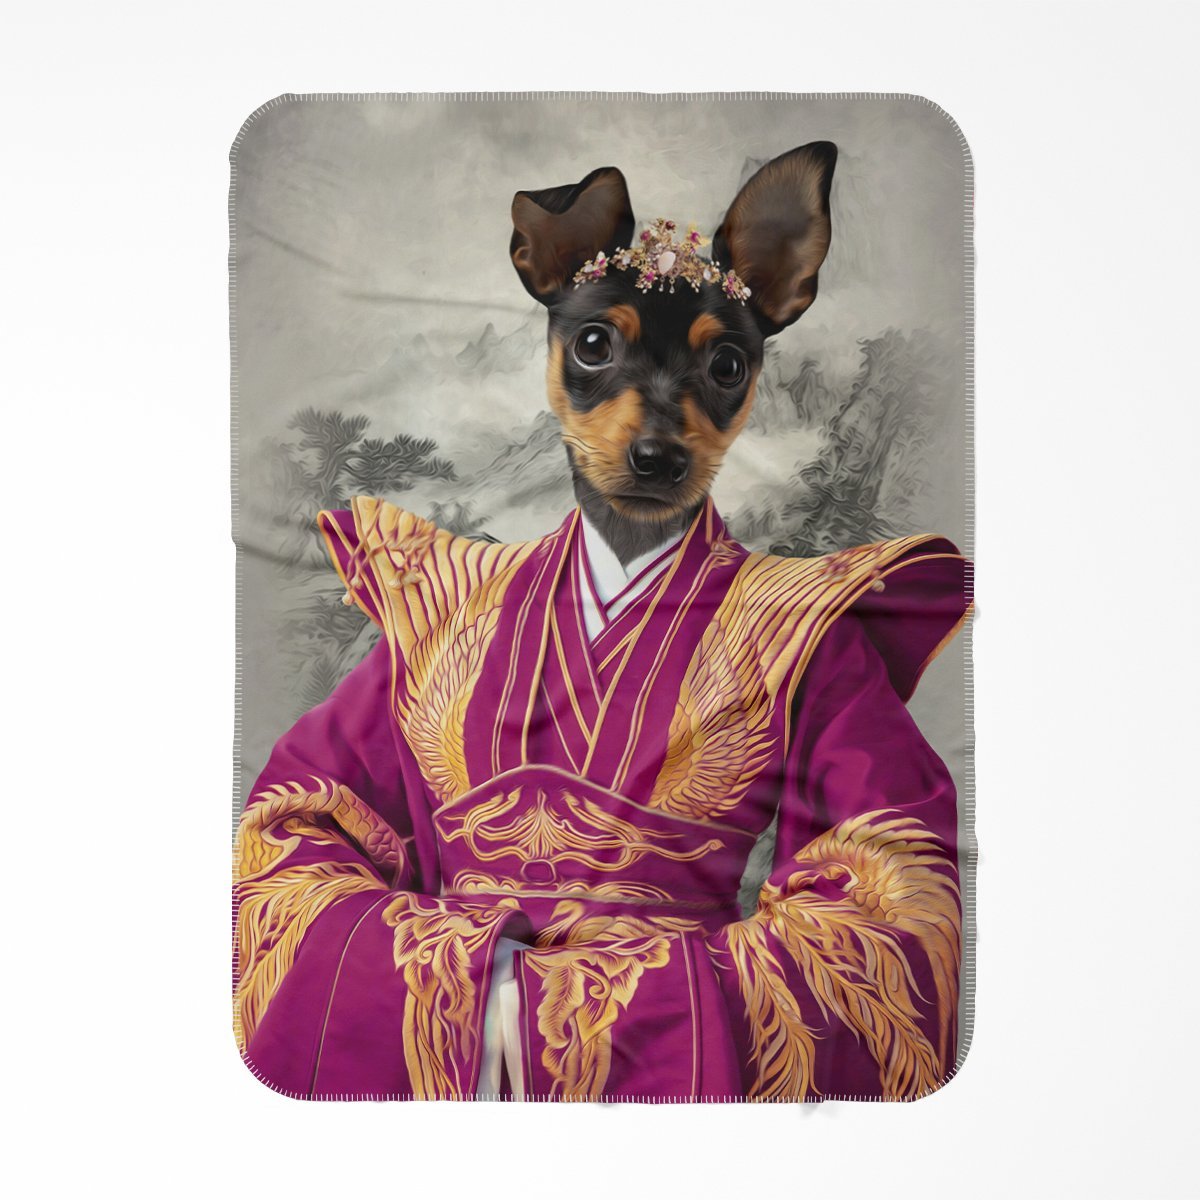 The Empress: Custom Pet Blanket - Paw & Glory - #pet portraits# - #dog portraits# - #pet portraits uk#Pawandglory, Pet art blanket,super soft dog blanket, soft puppy blanket, pet blanket for bed, best dog blanket for couch, personalised dog blanket next day delivery